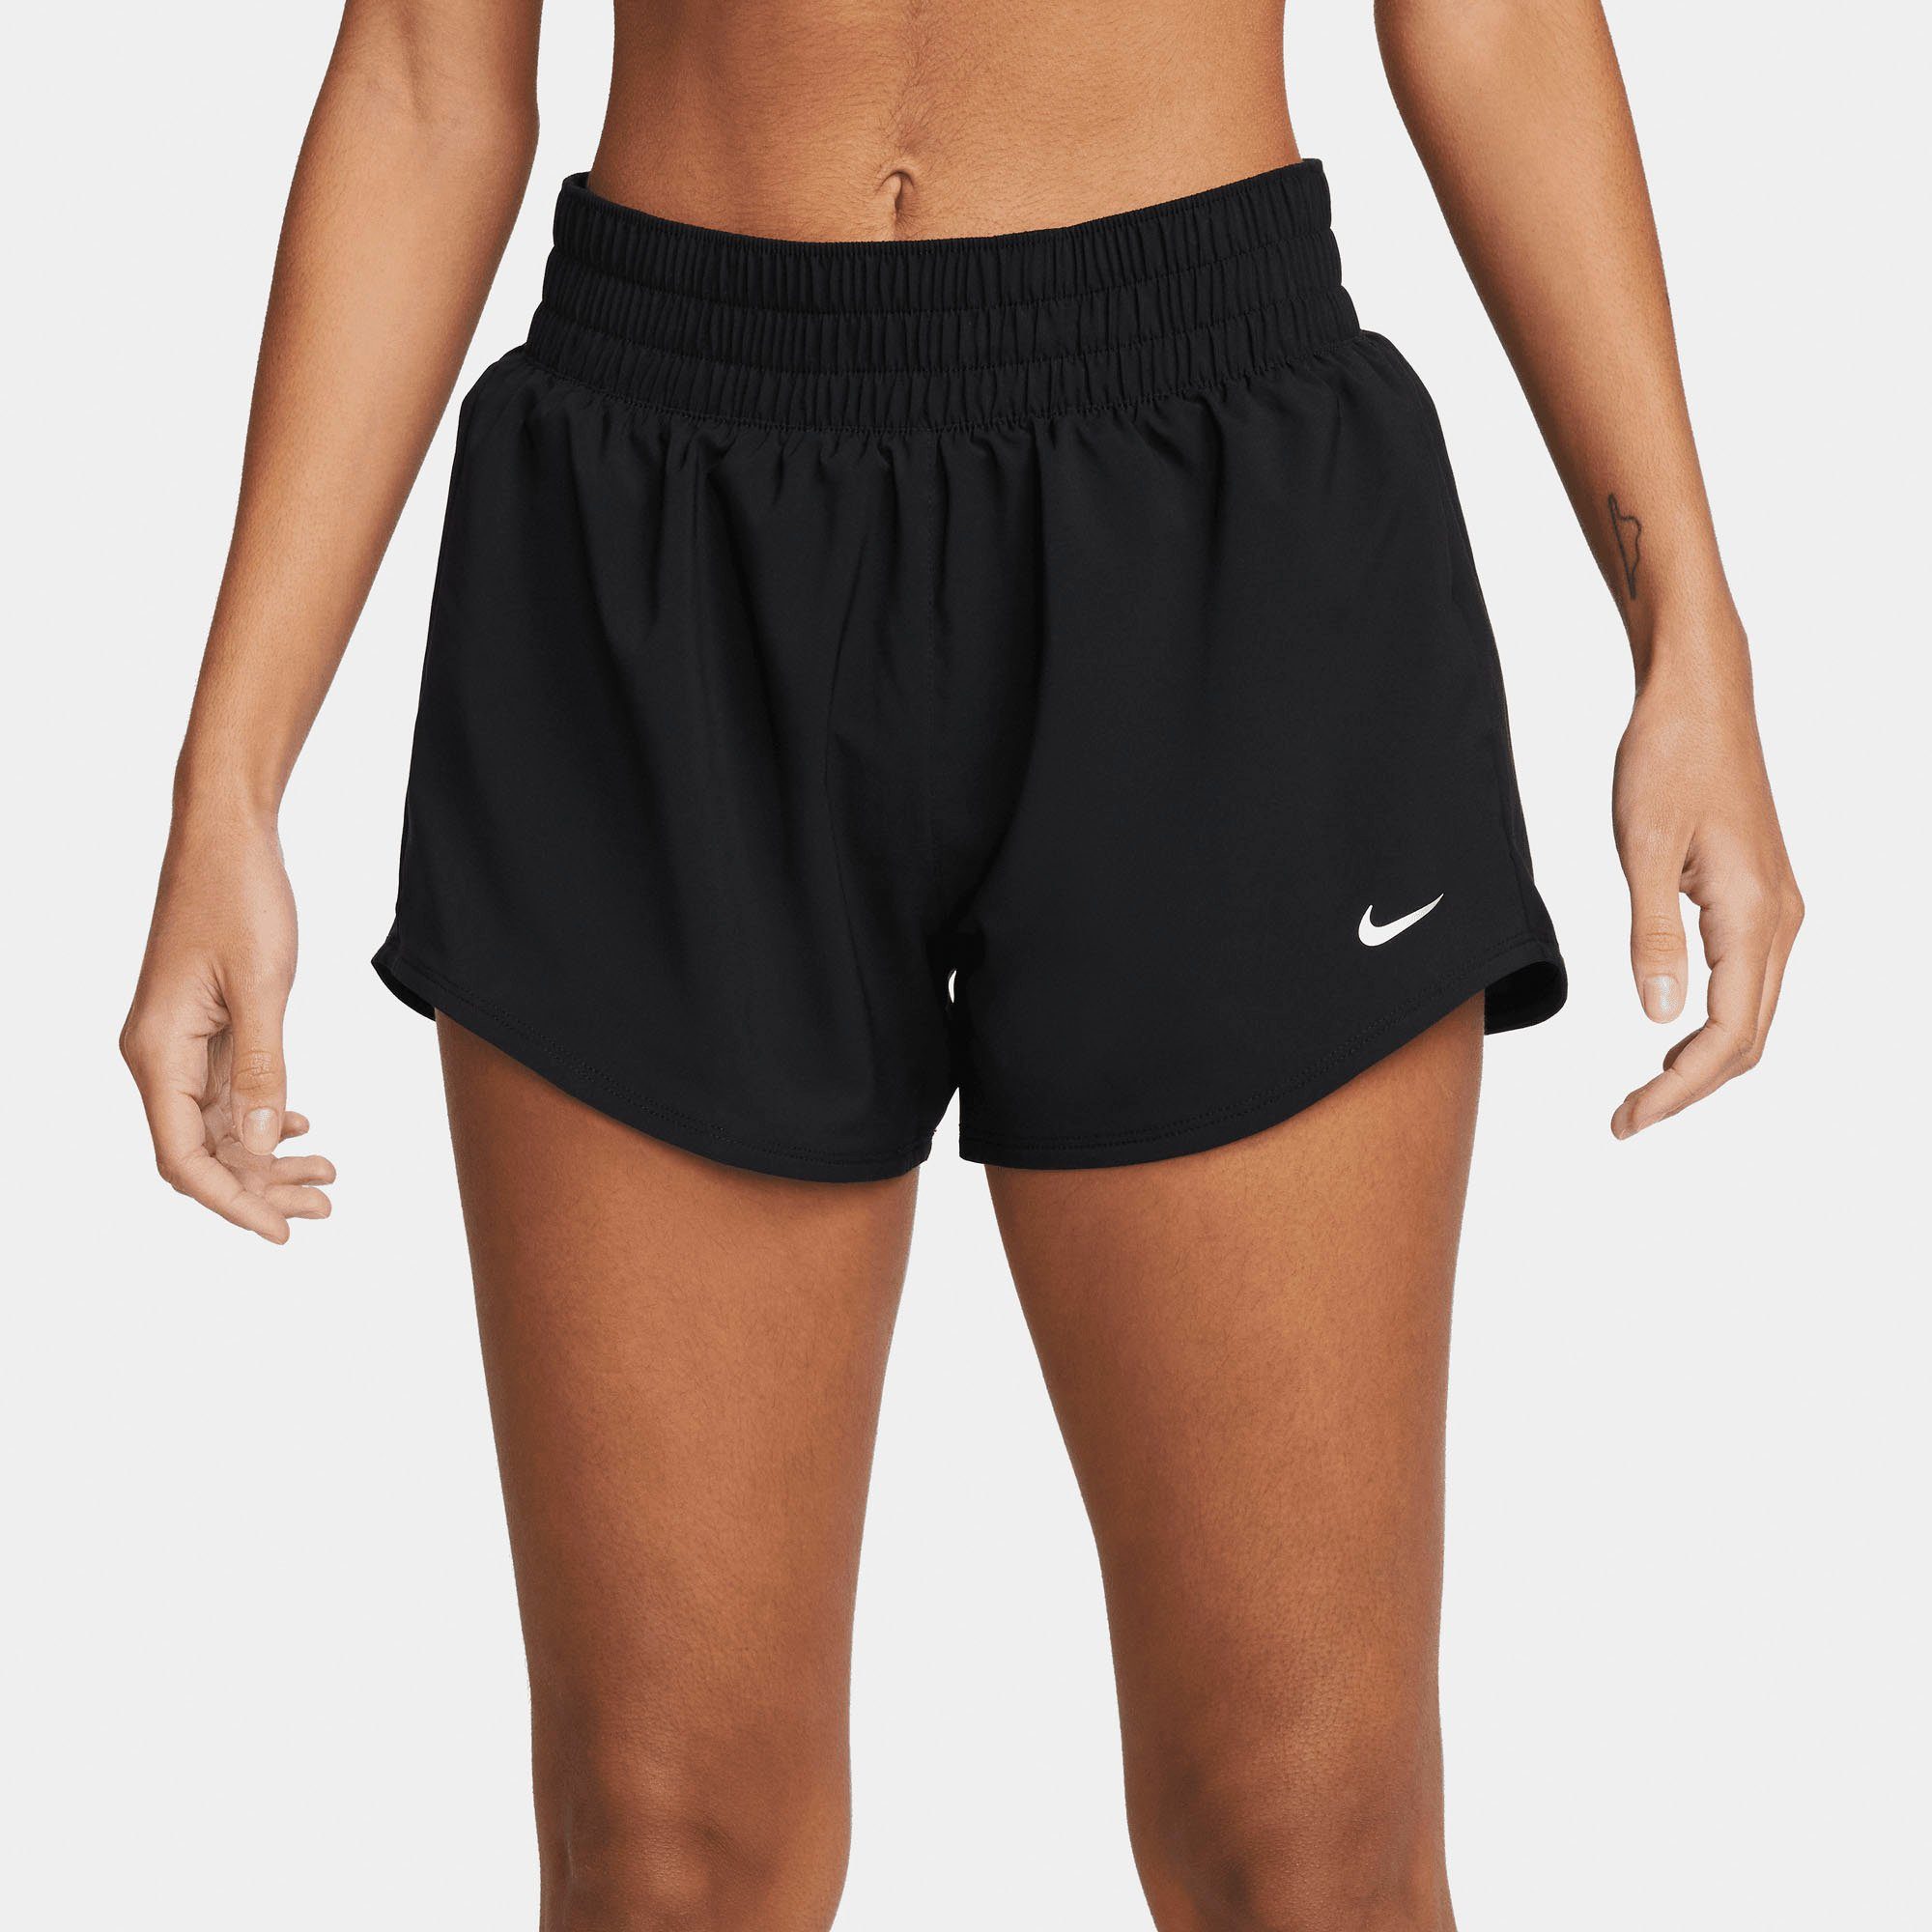 Nike Trainingsshorts DRI-FIT BLACK/REFLECTIVE MID-RISE SHORTS WOMEN'S SILV BRIEF-LINED ONE